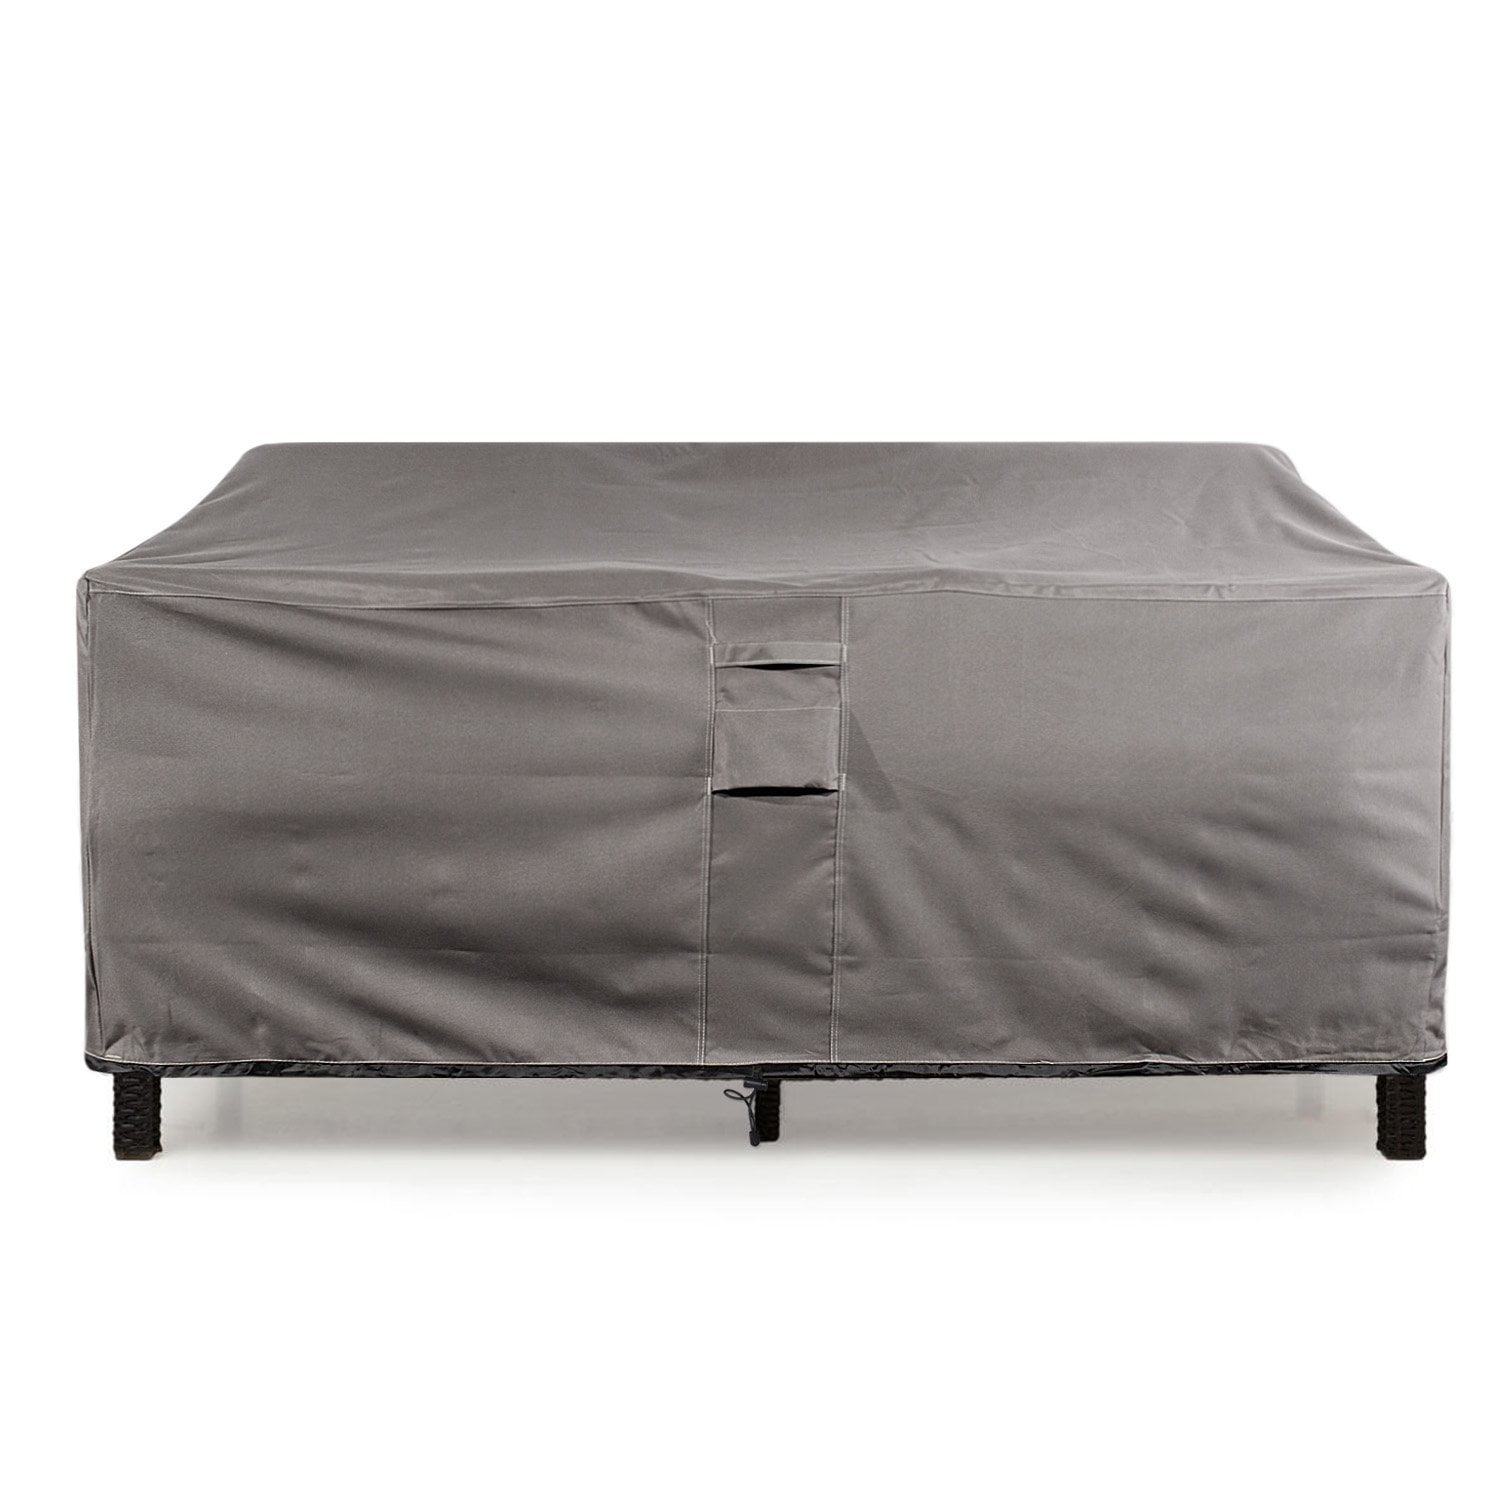 104 in. W x 32.5 in. D x 33 in. H Gray/Black Waterproof Outdoor Couch Cover,  Heavy-Duty 4-Seater Patio Sofa Cover B07YJRLWLM - The Home Depot